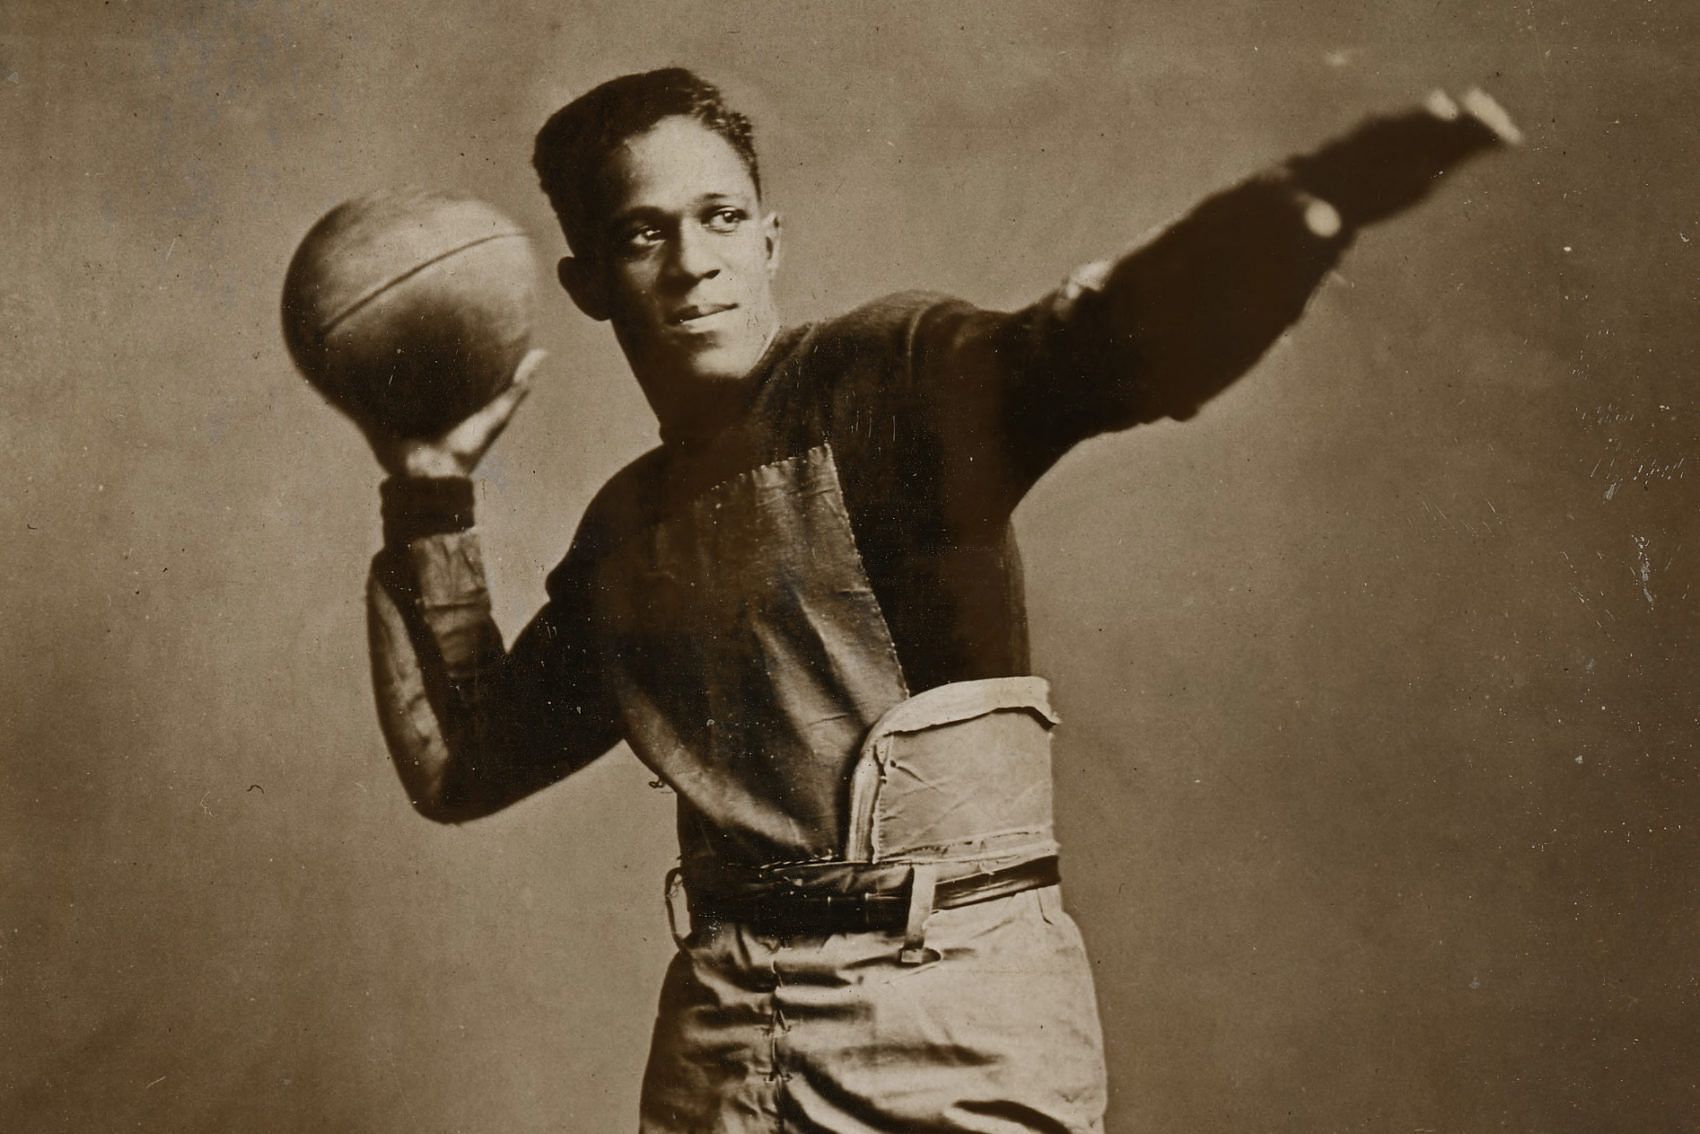 Fritz Pollard - one of African-American players and head coaches in NFL